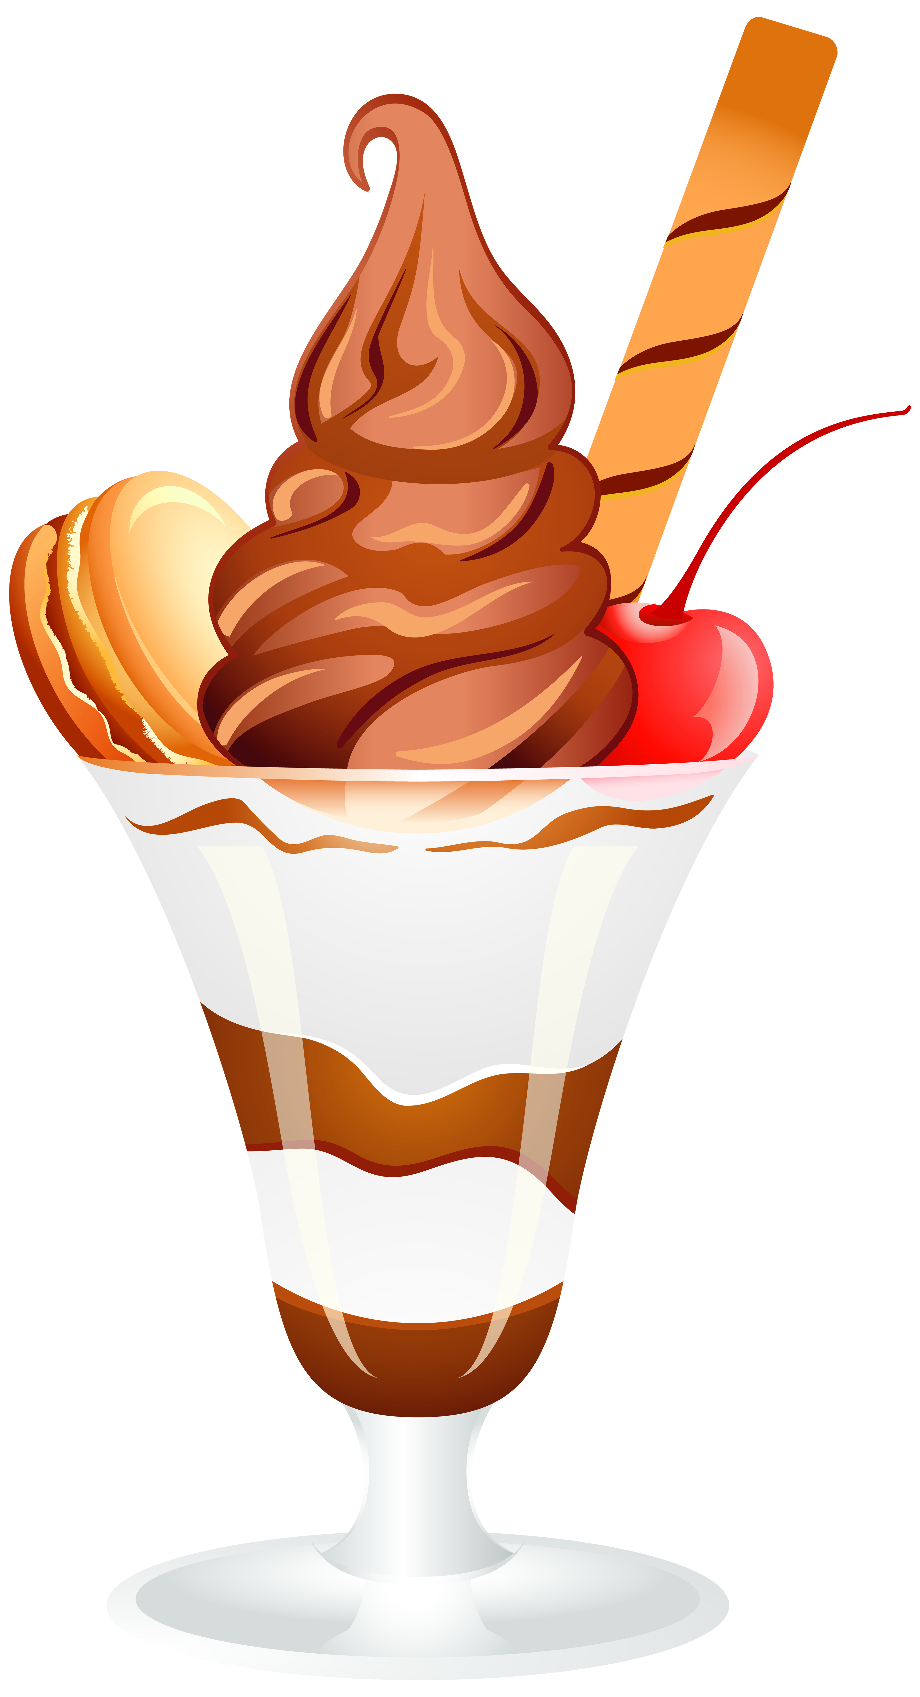 Ice Cream Sundae Png Pictures Of Ice Cream Sundaes Free Download On Clipartmag